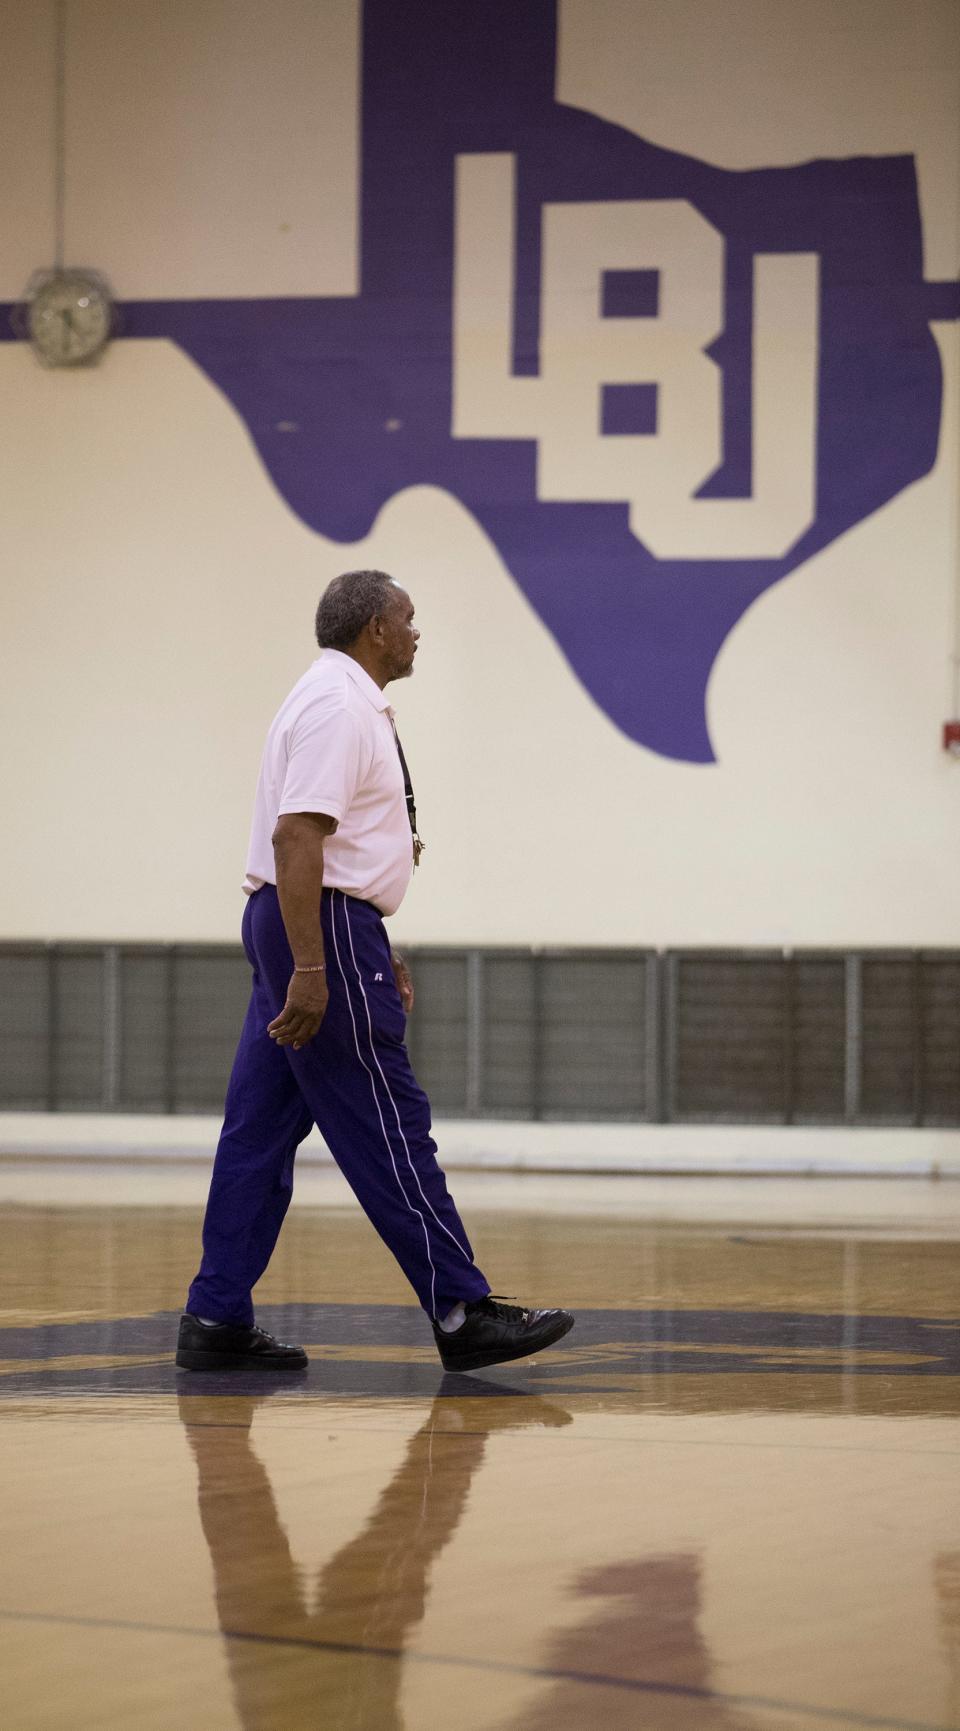 Longtime LBJ boys basketball coach Freddie Roland has been synonymous with Jaguars basketball for decades. LBJ's 26-year streak of winning the district championship will come to an end this season, but Roland already has his goal set for 2024-25: a state championship.